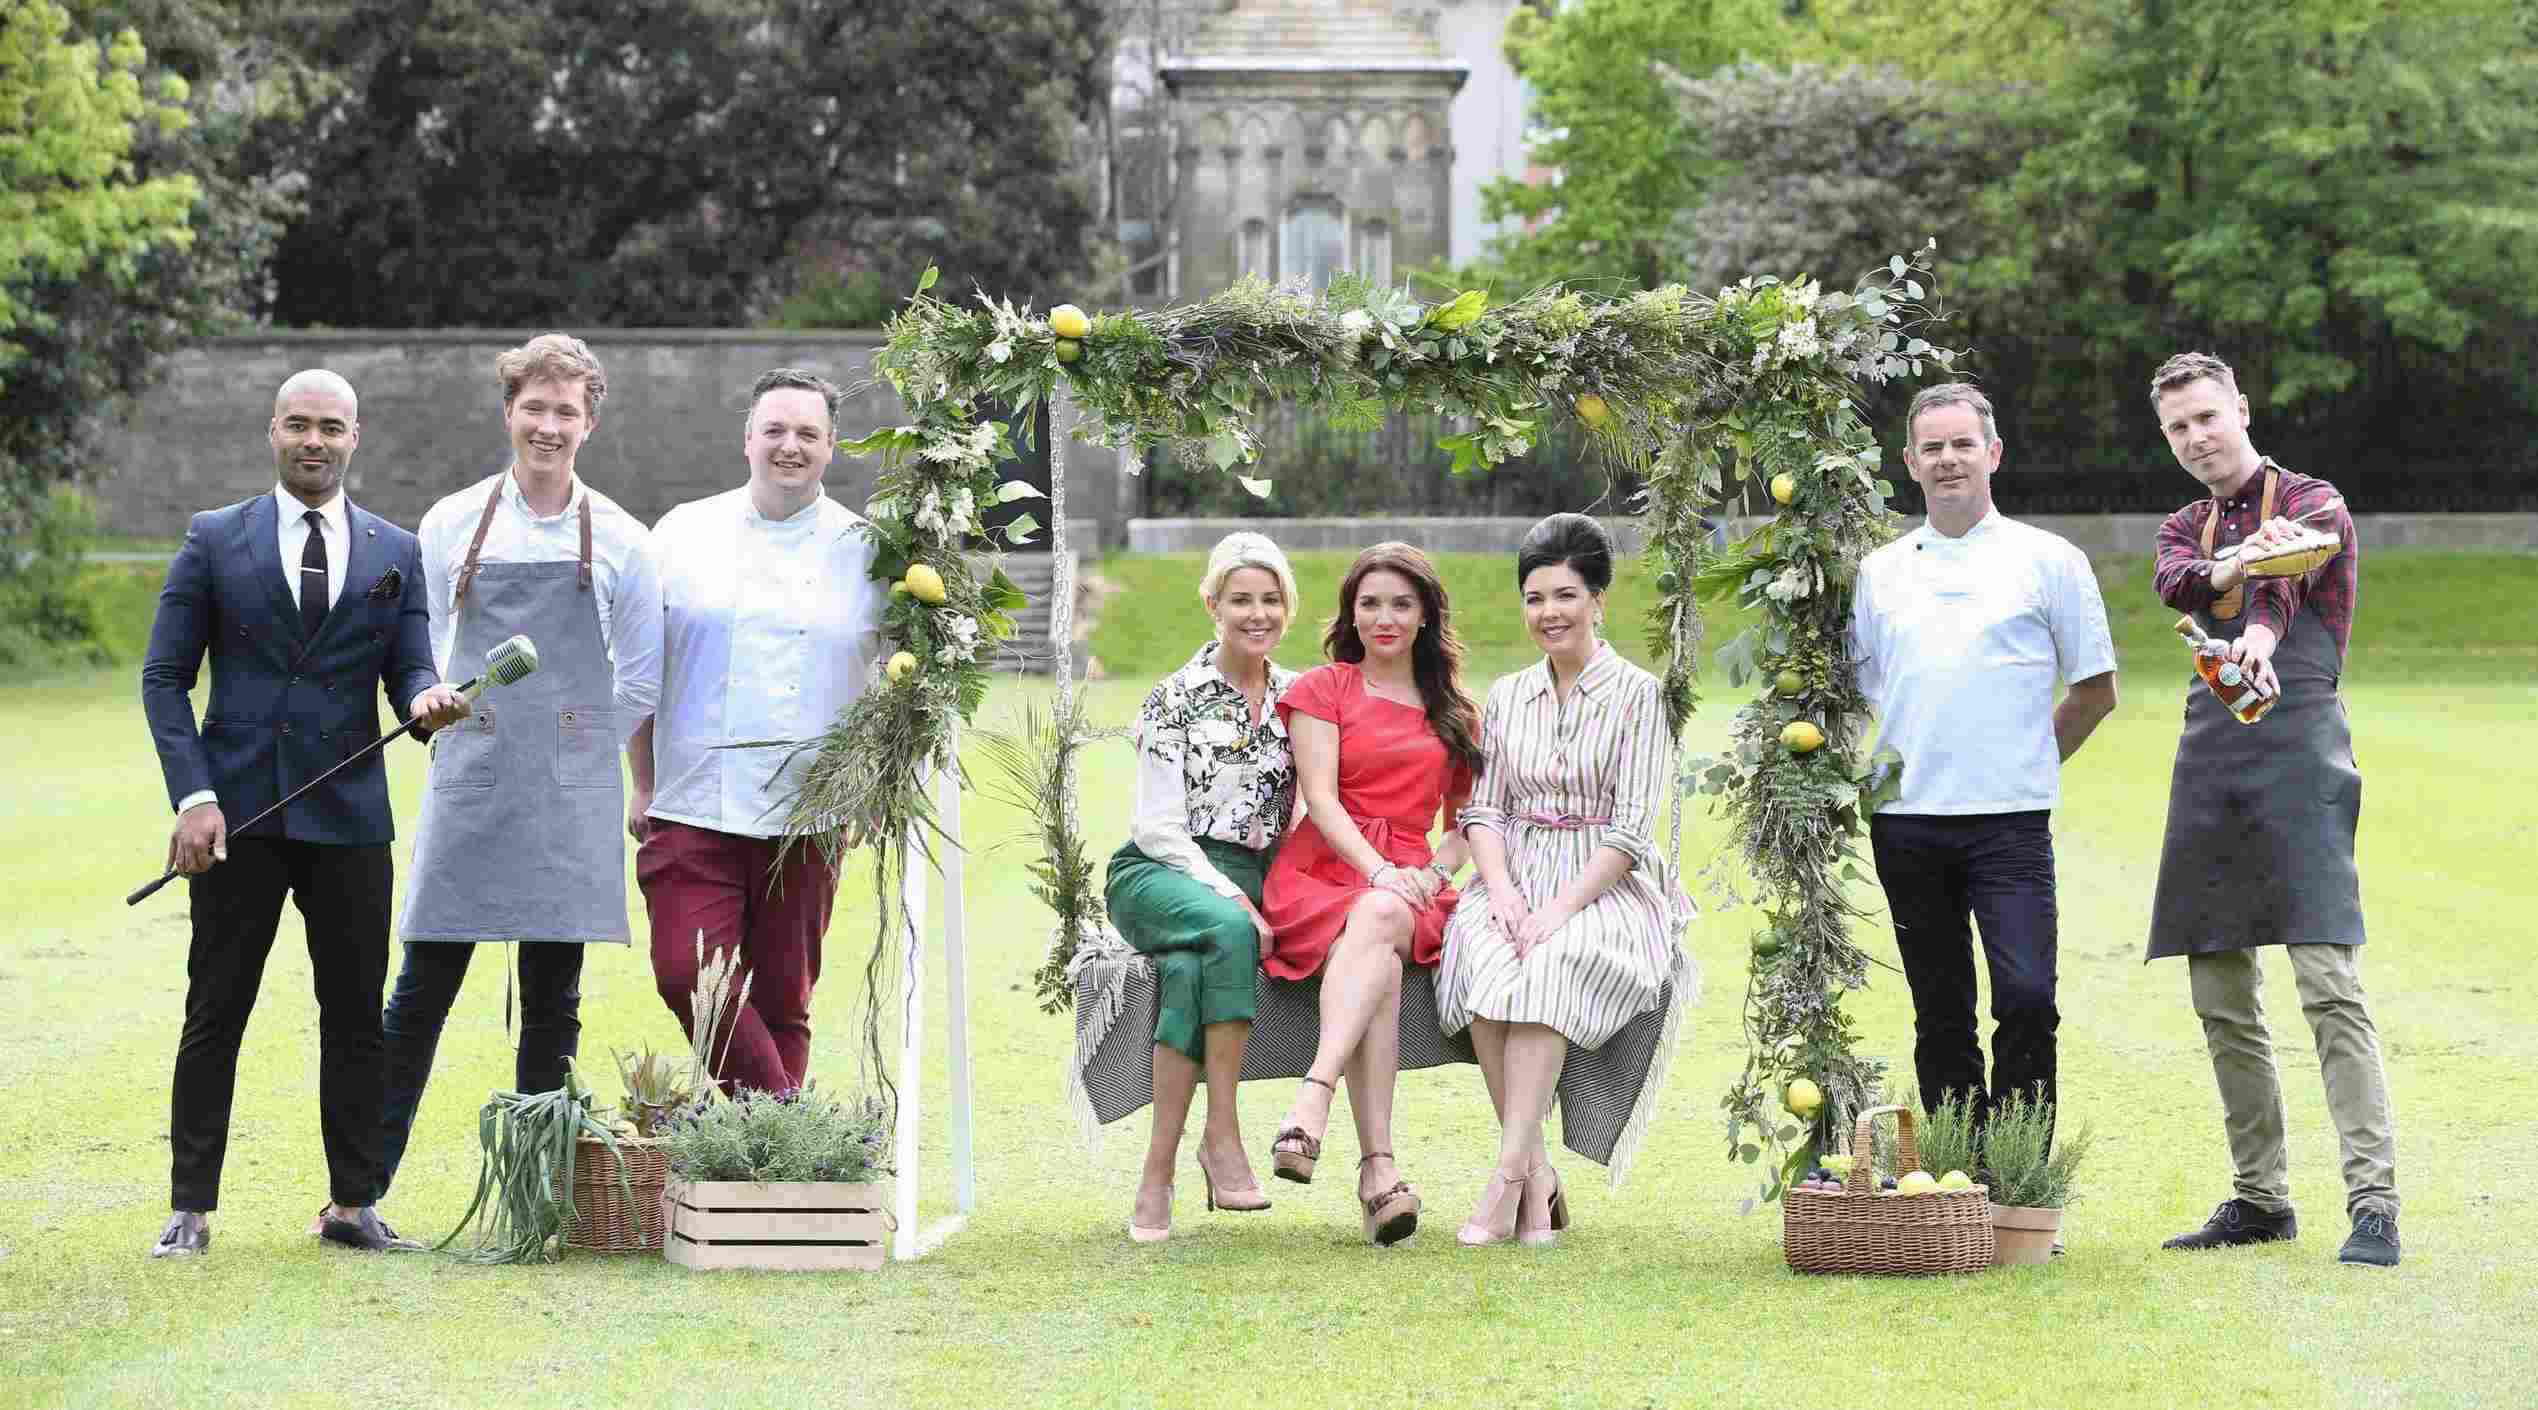 At the launch of Taste of Dublin 2018 are (from left): Lead singer with The Swing Cats Luke Thomas​, Food Writer and TV Chef Adrian Martin​, The Cupcake Bloke Graham Herterich​, Managing Director of Taste of Dublin Avril Bannerton, Candice Brown​ of the Great British Bake Off, ​ Food Stylist and Cookbook Author Sharon Hearne-Smith​, Head Chef/Proprietor at Roly’s Bistro Paul Cartwright and World Class Brand Ambassador for Diageo Reserve Nial Molloy​.